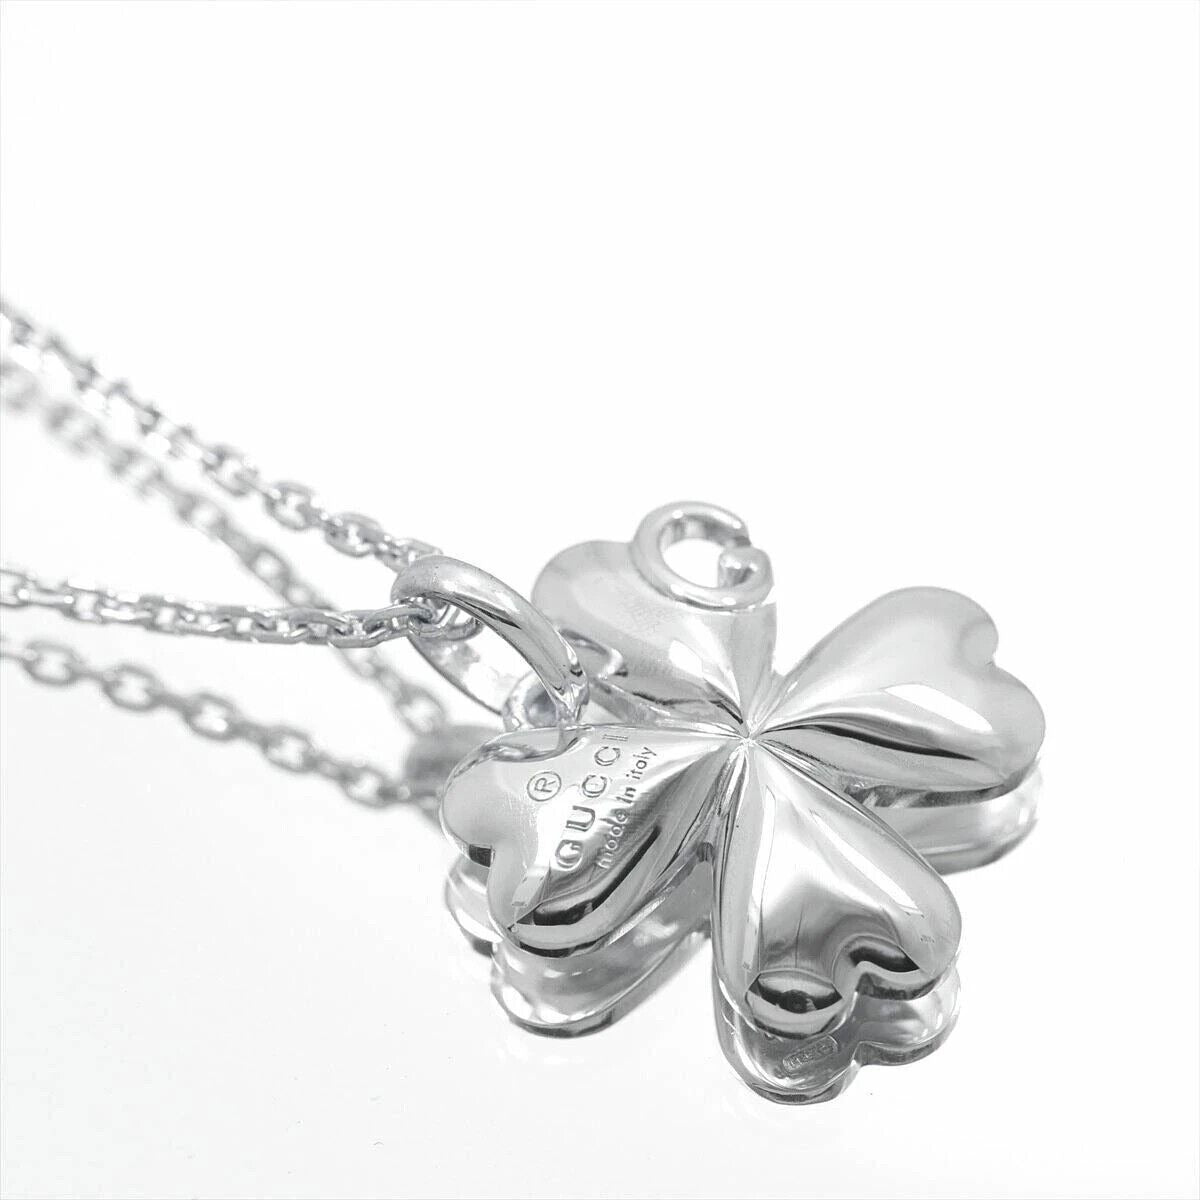 Gucci sterling silver four leaf clover pendant with G logo cut-out on an 18" chain